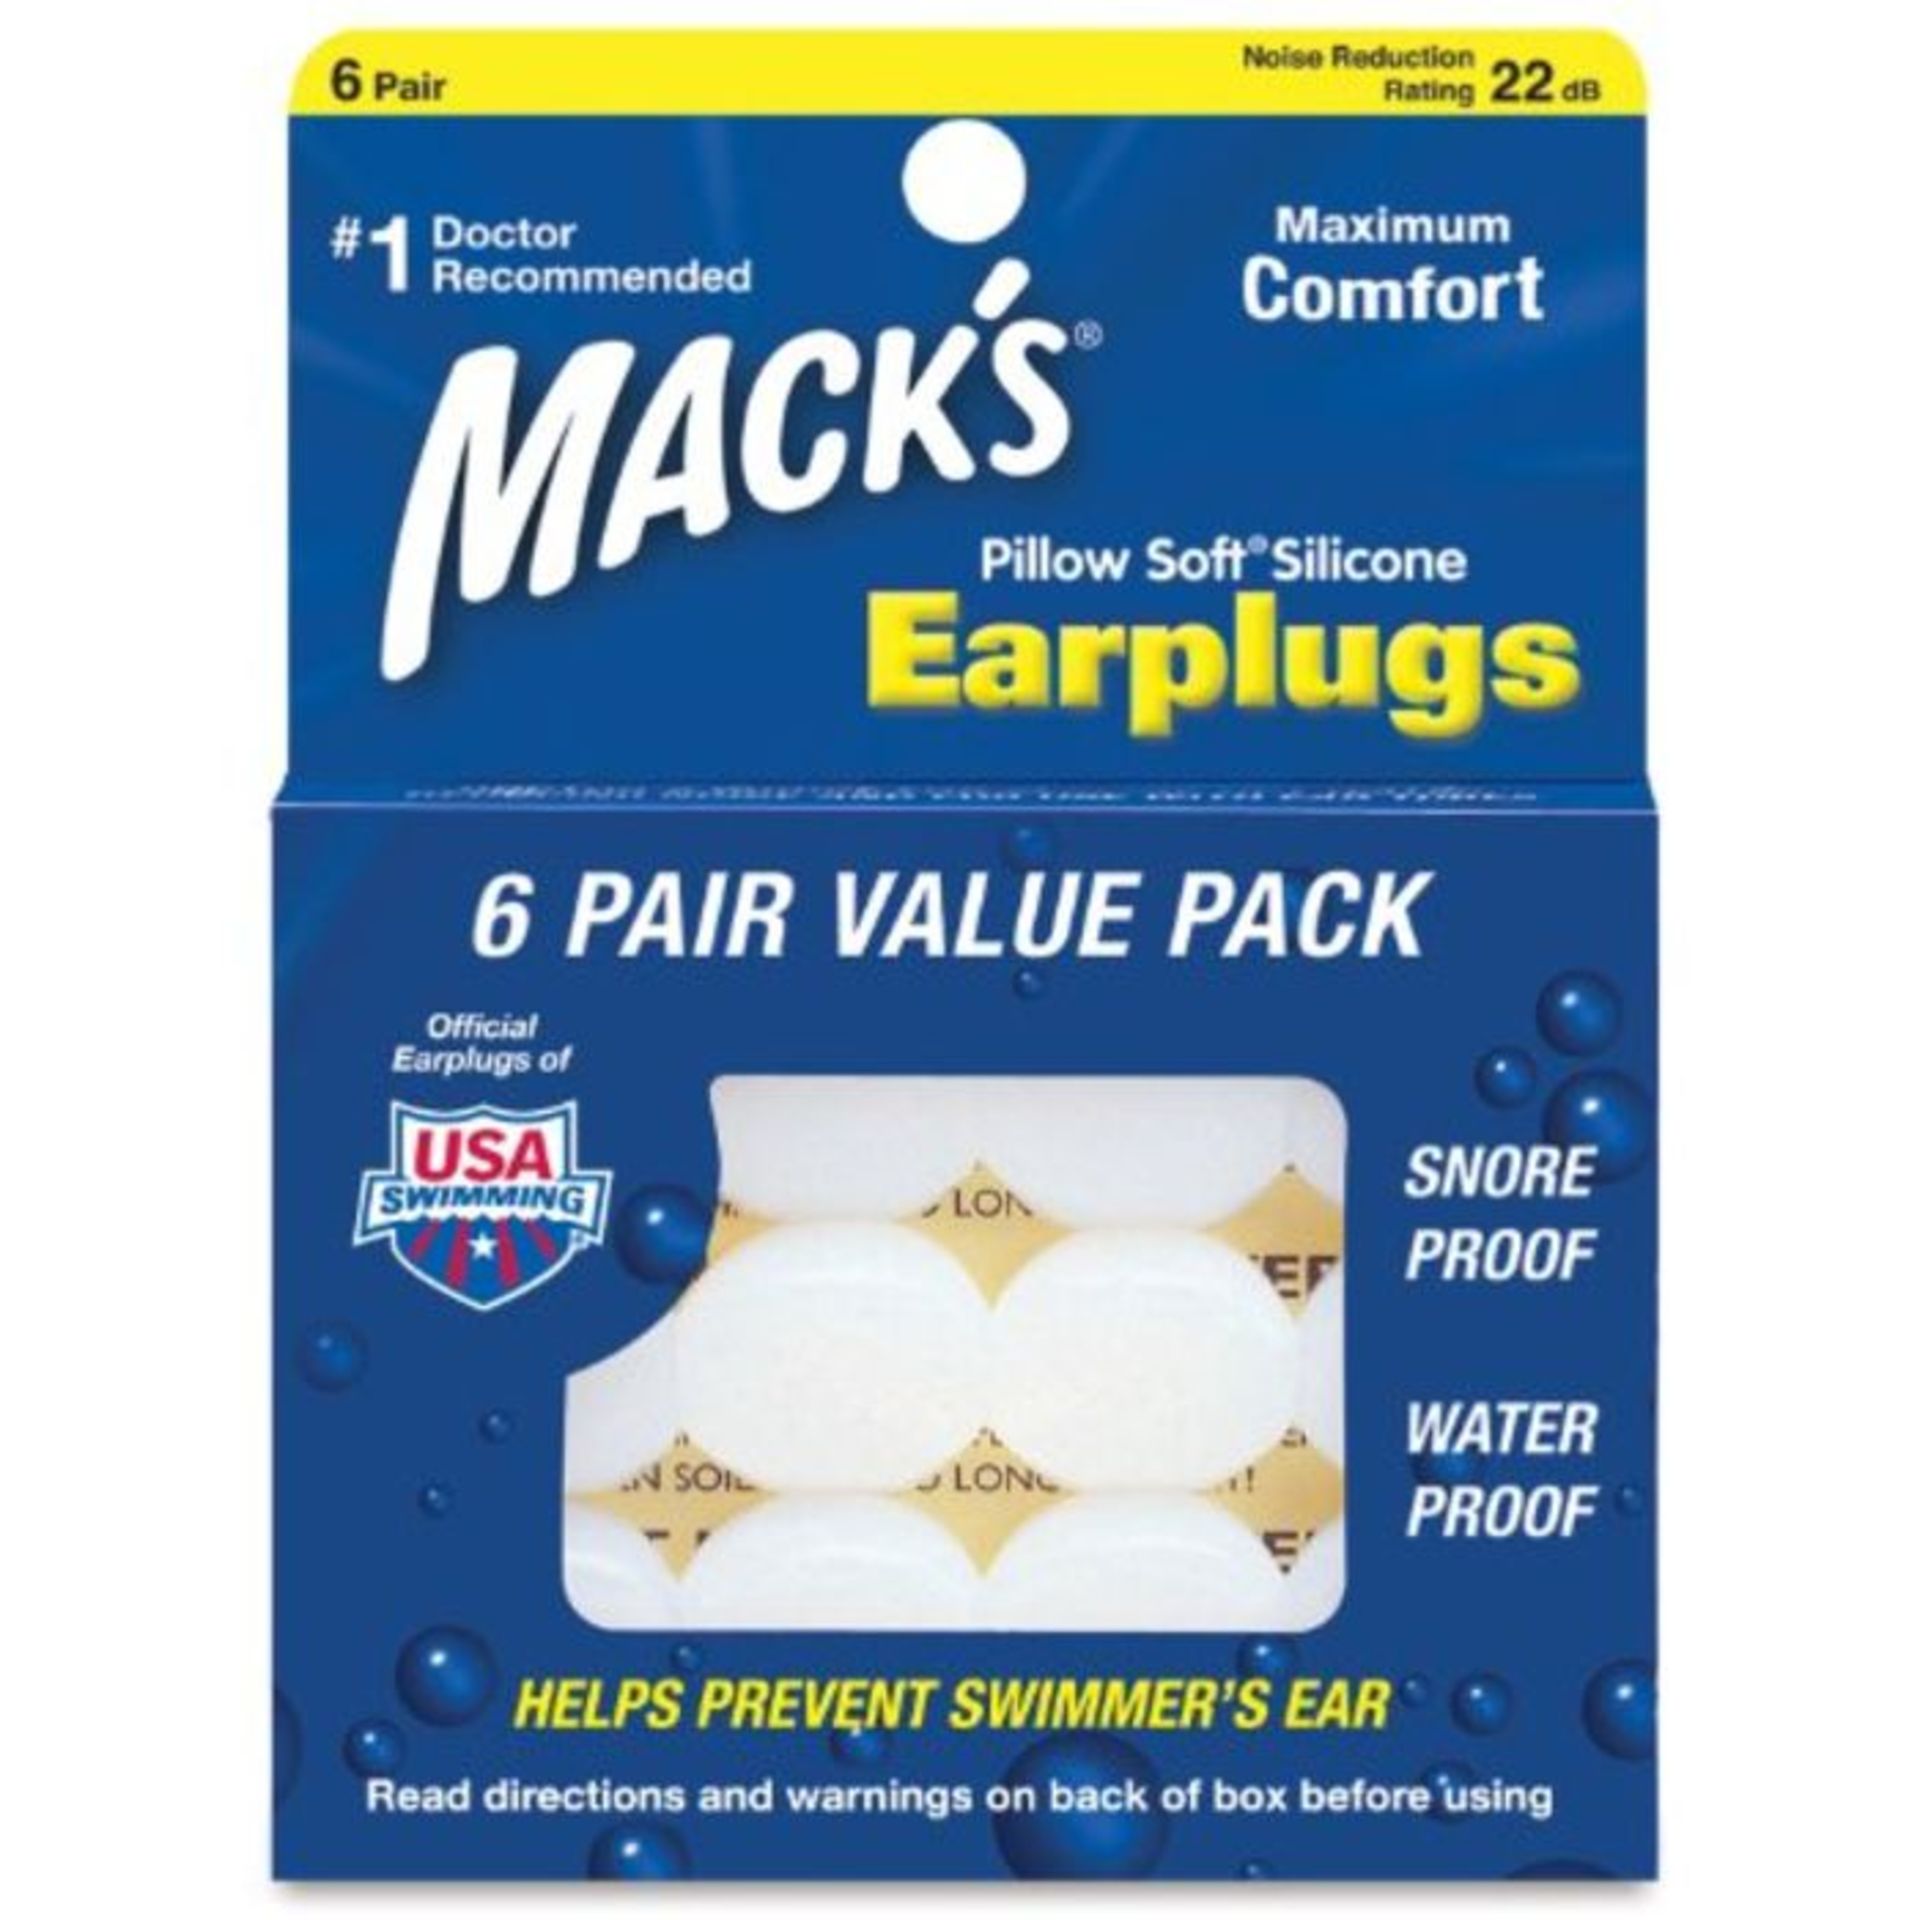 Mack's Pillow Soft Silicone Earplugs (4 Pack)